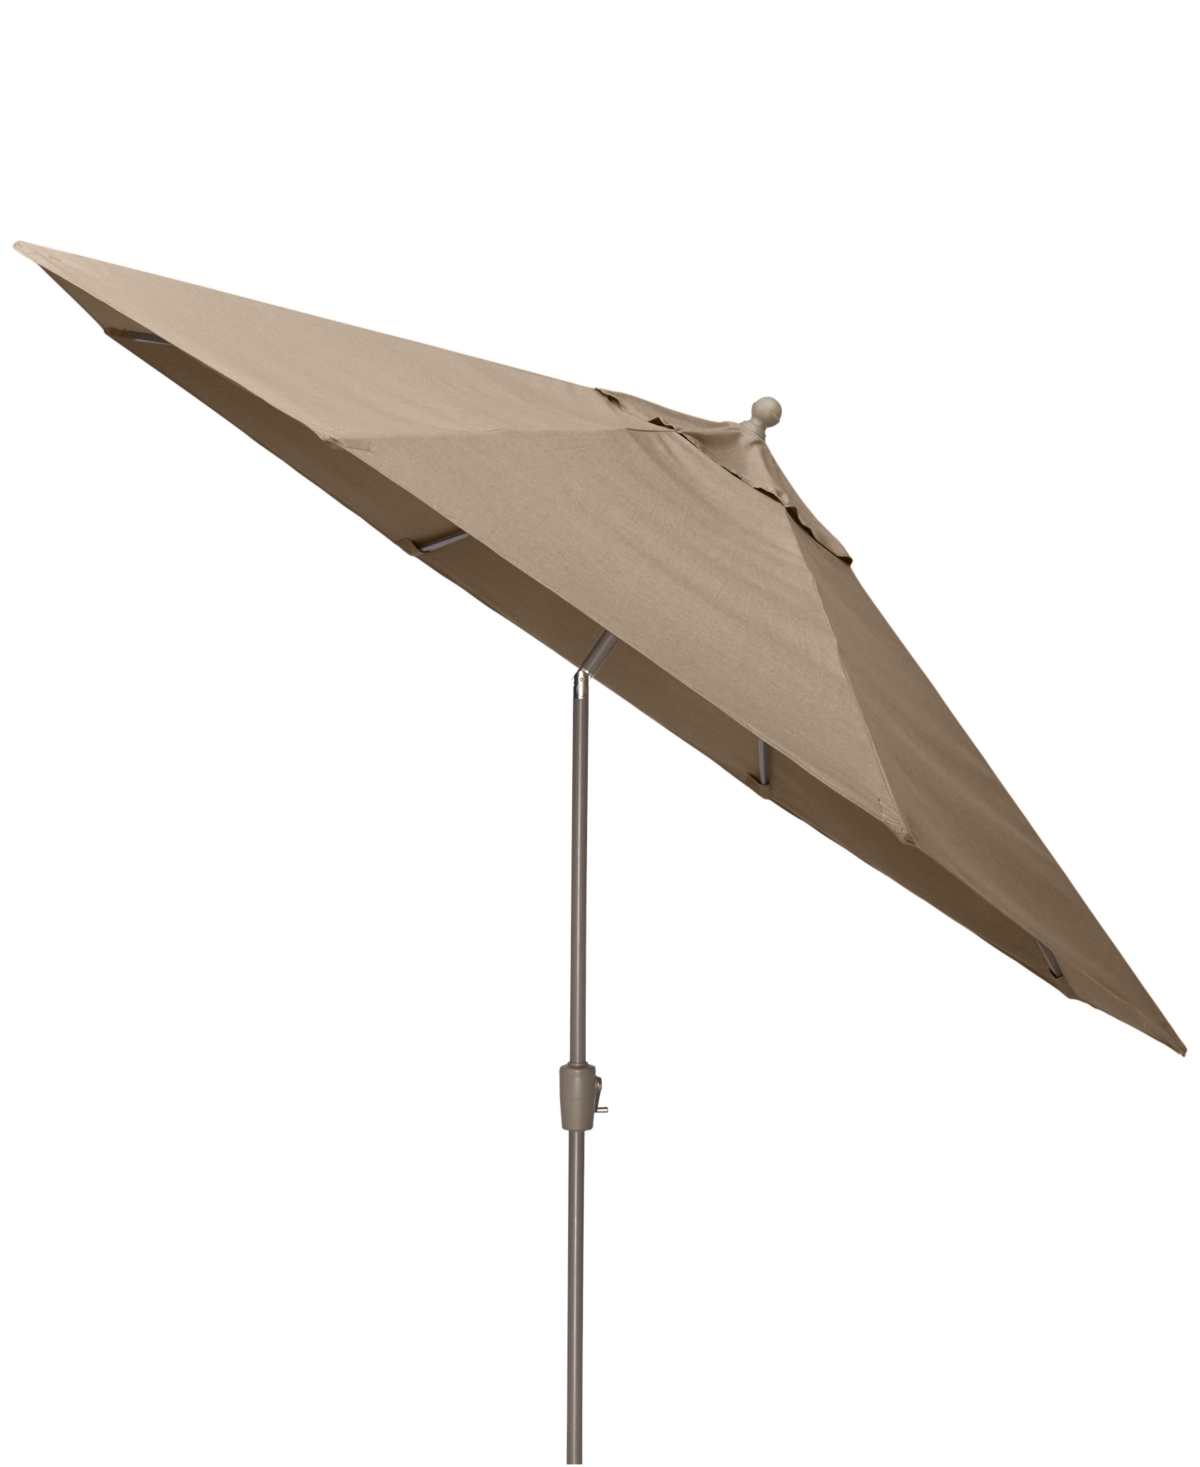 Agio Wayland Outdoor 11' Umbrella, Created For Macy's In Outdura Remy Pebble